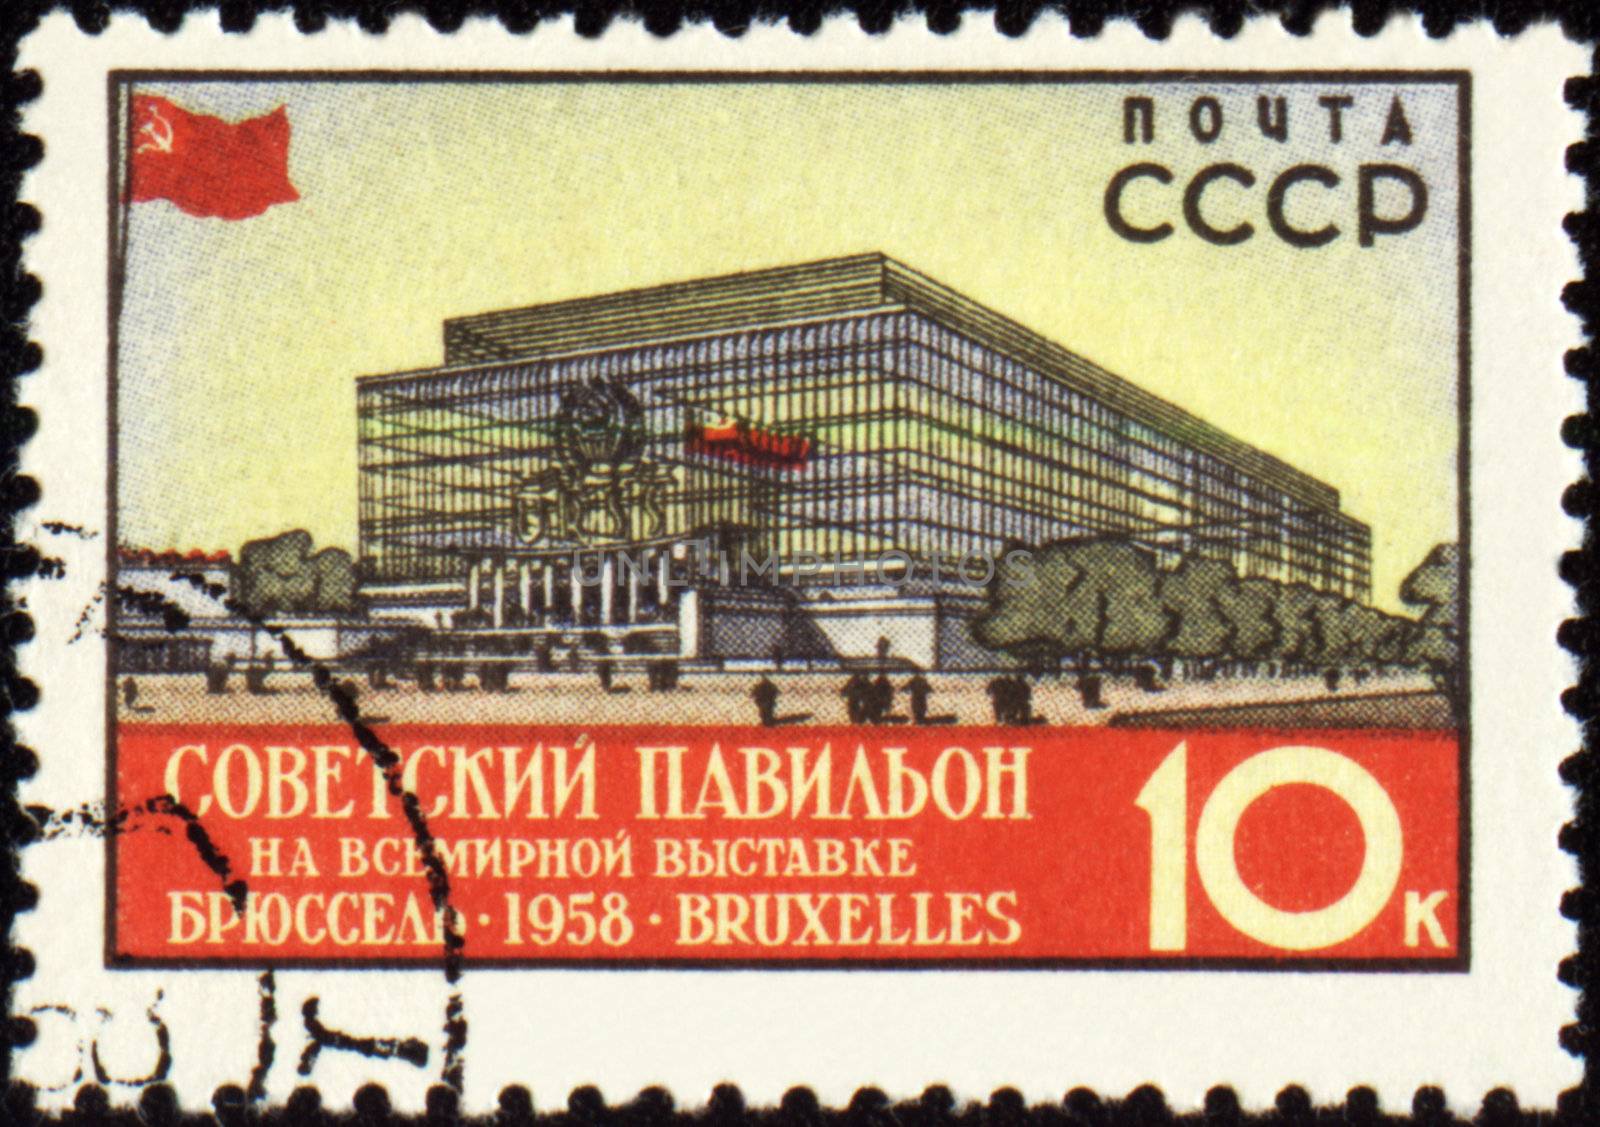 USSR - CIRCA 1958: a stamp printed in USSR shows The Soviet pavilion at the World Exhibition in Brussels, circa 1958